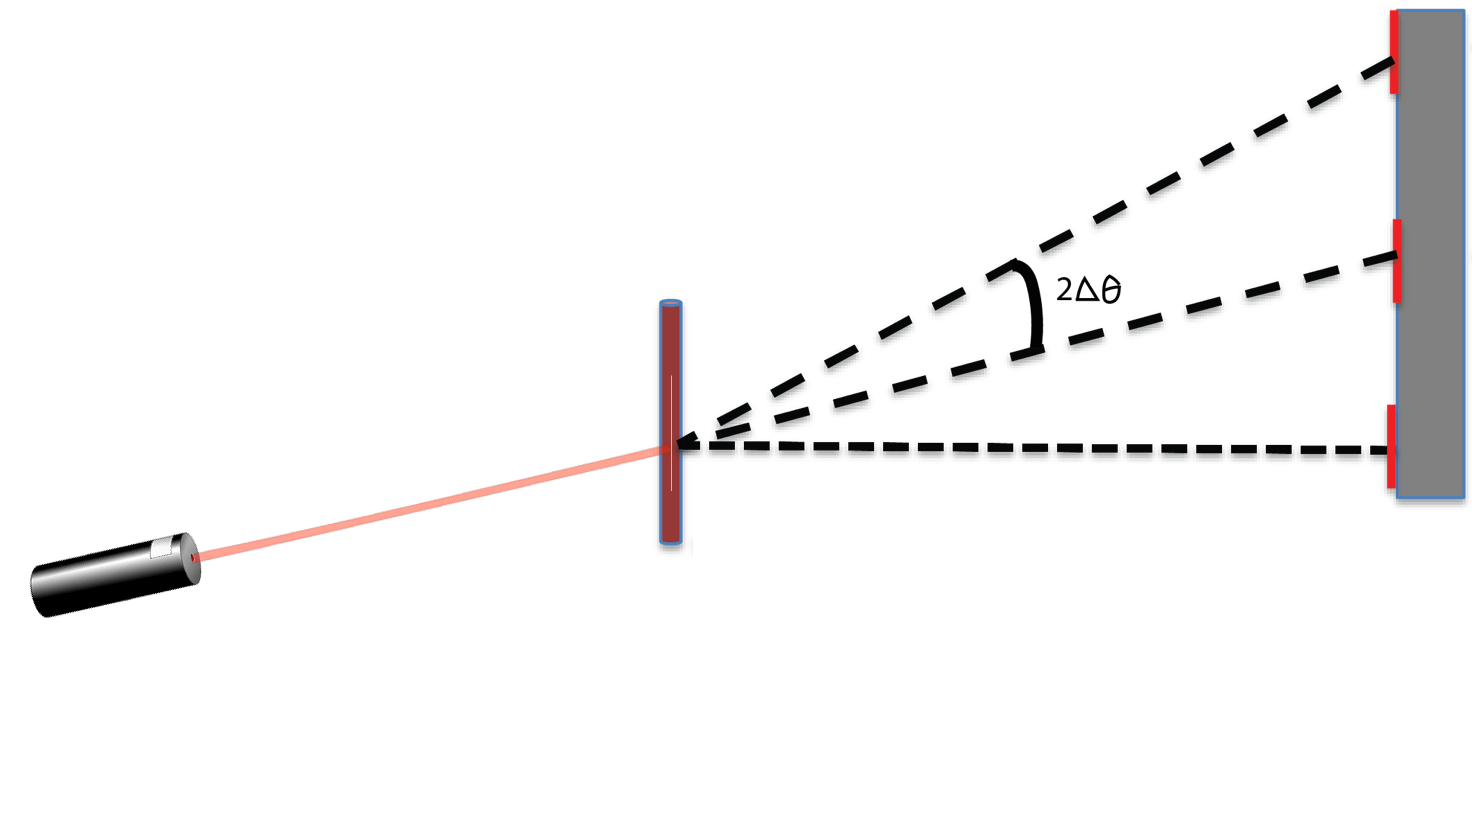 Fig. 2 How light scatters (click image to enlarge)